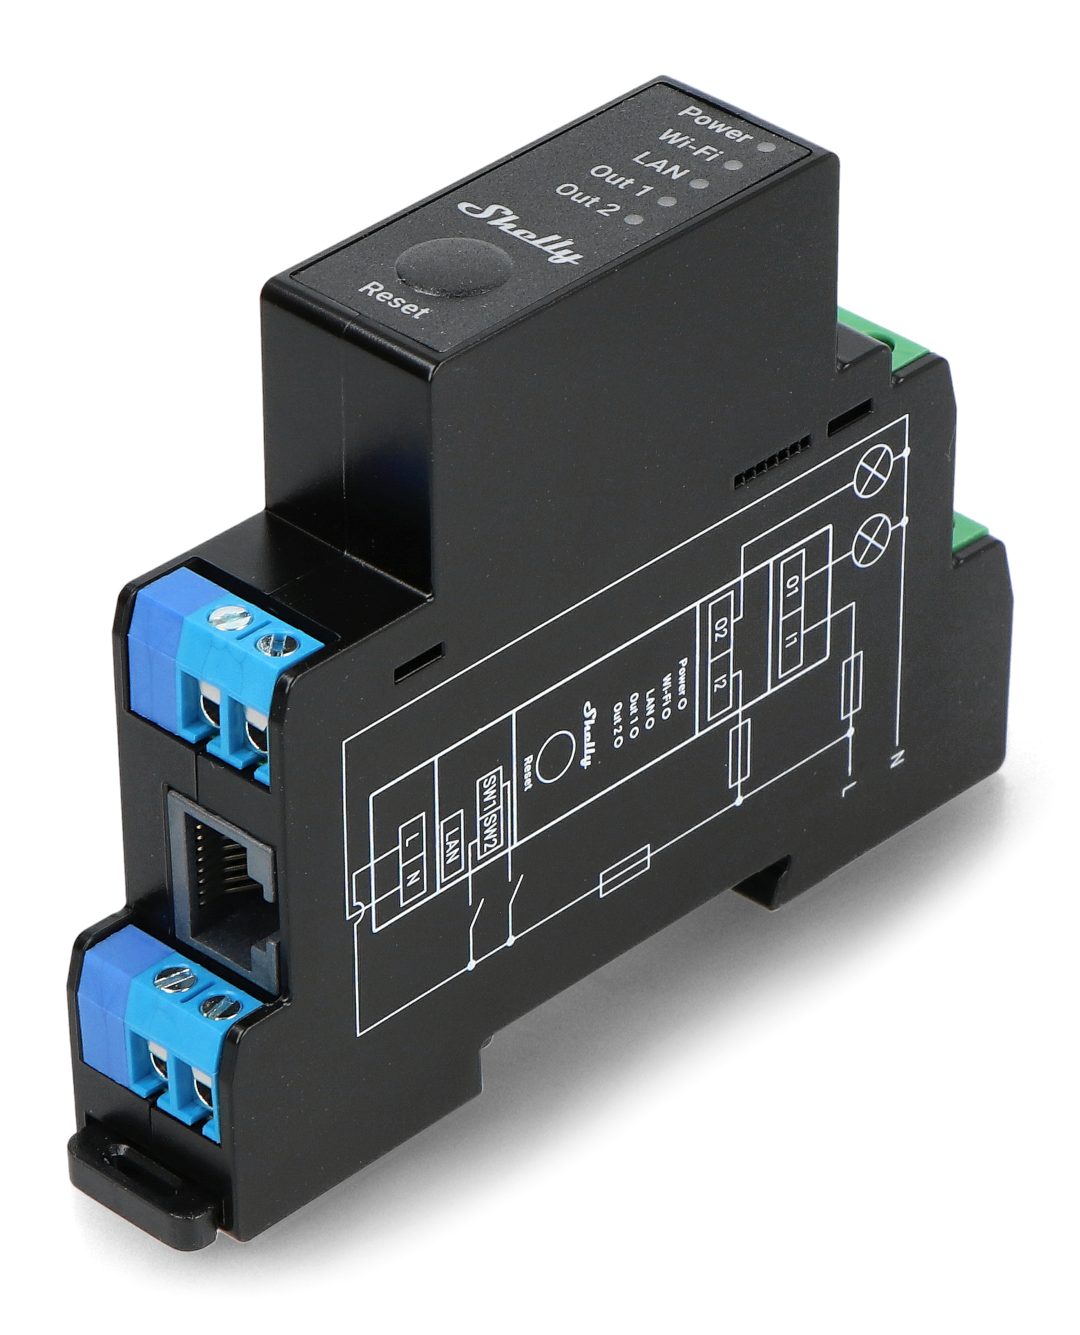 Shelly Pro 2PM, Professional 2 Channel Relay, 25A for the Set, DIN Rail,  Electric Counter, Coverage Control, LAN Connection, Wi-Fi & Bluetooth